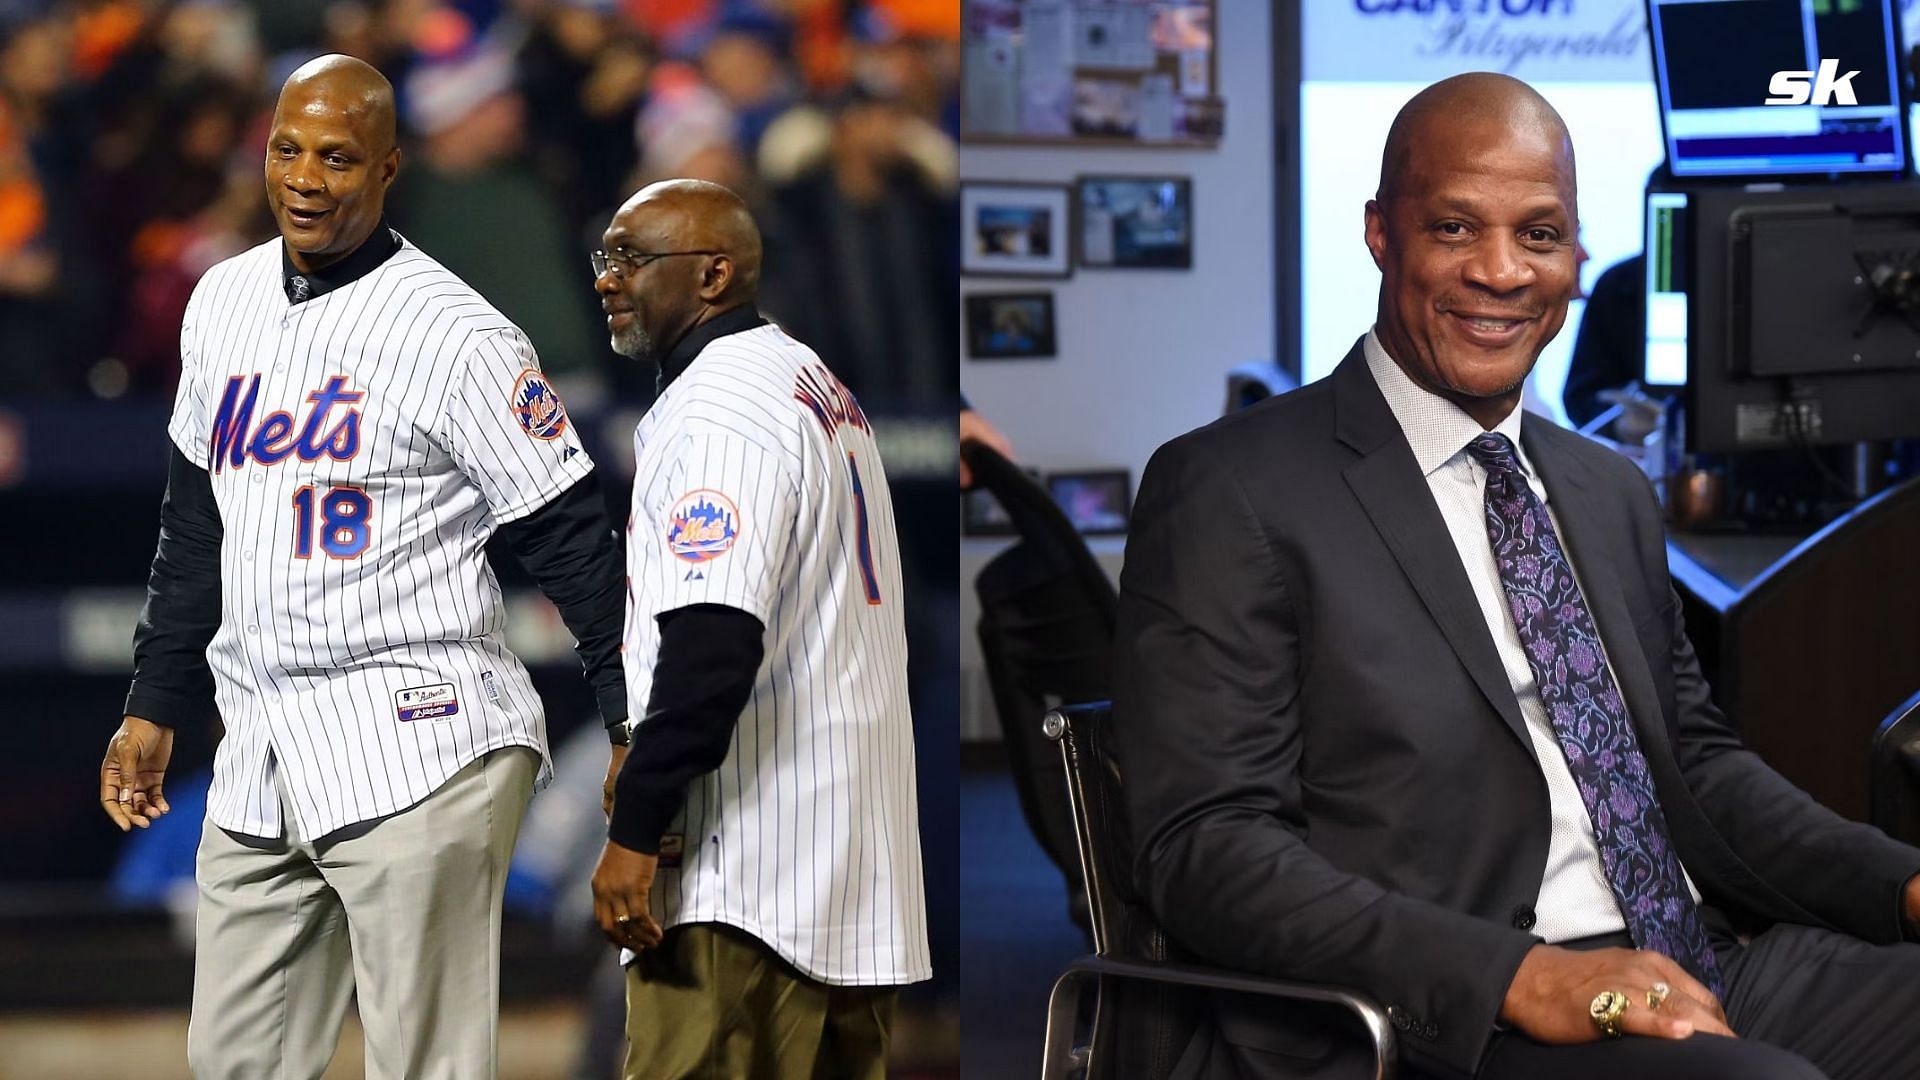 New York Mets icon Darryl Strawberry released from hospital after suffering heart attack